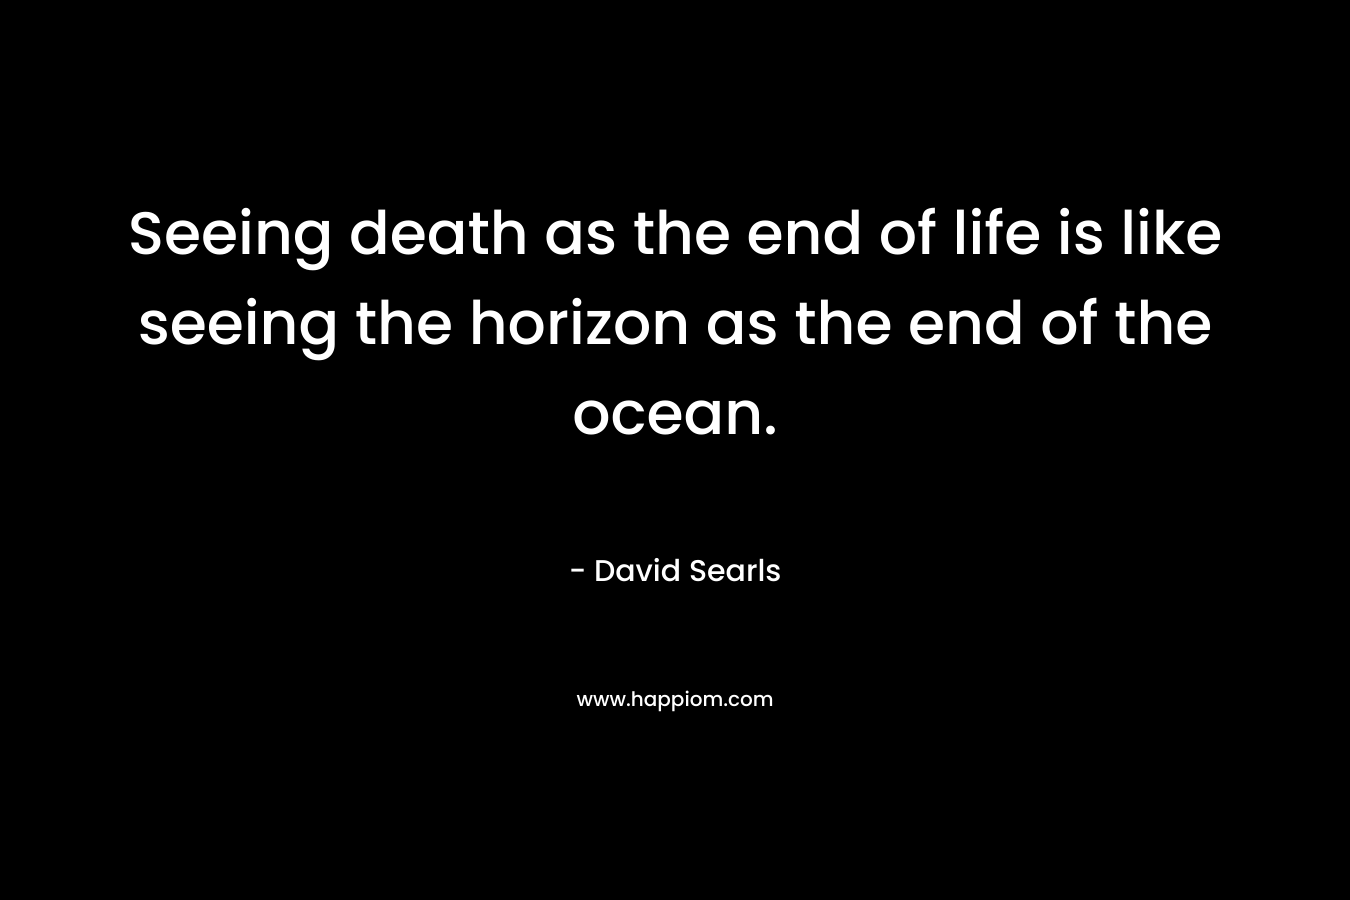 Seeing death as the end of life is like seeing the horizon as the end of the ocean.